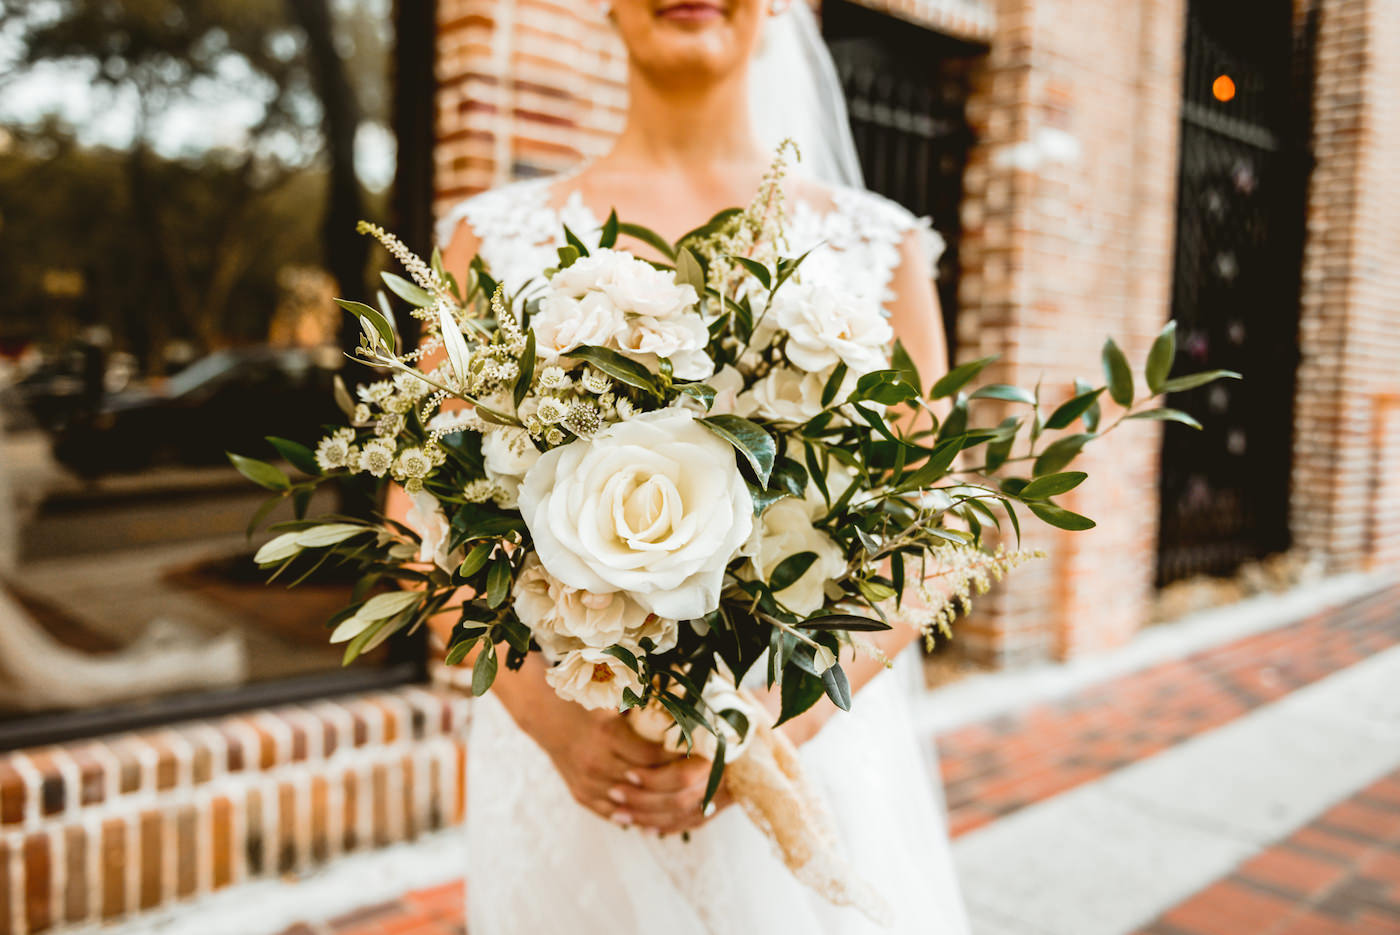 Natural Neutral Wedding Bridal Bouquet with White Roses and Ivory Spray Tea Roses and Astilbe Accented with Olive Leaf Greenery